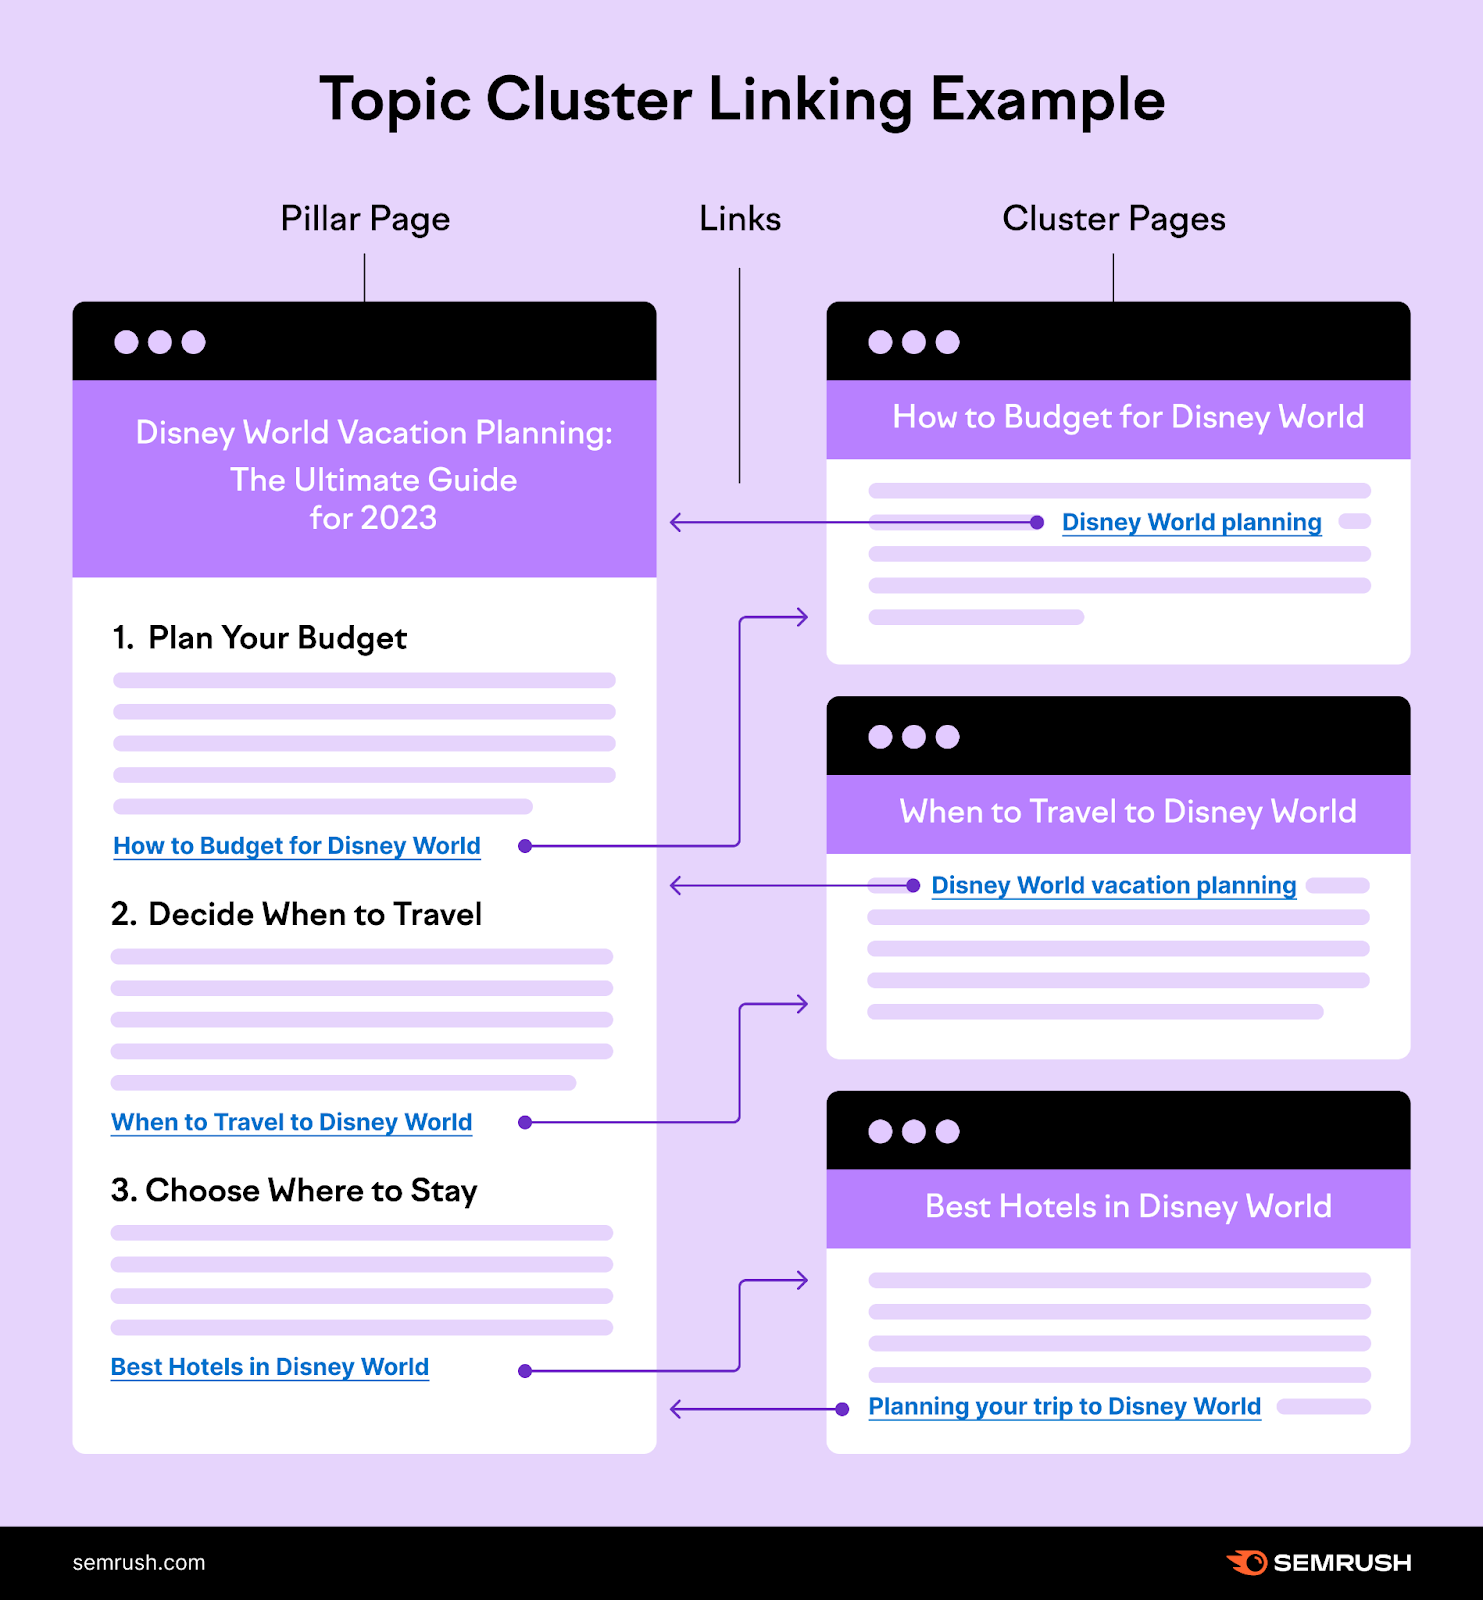 infographic showing "topic cluster linking example"